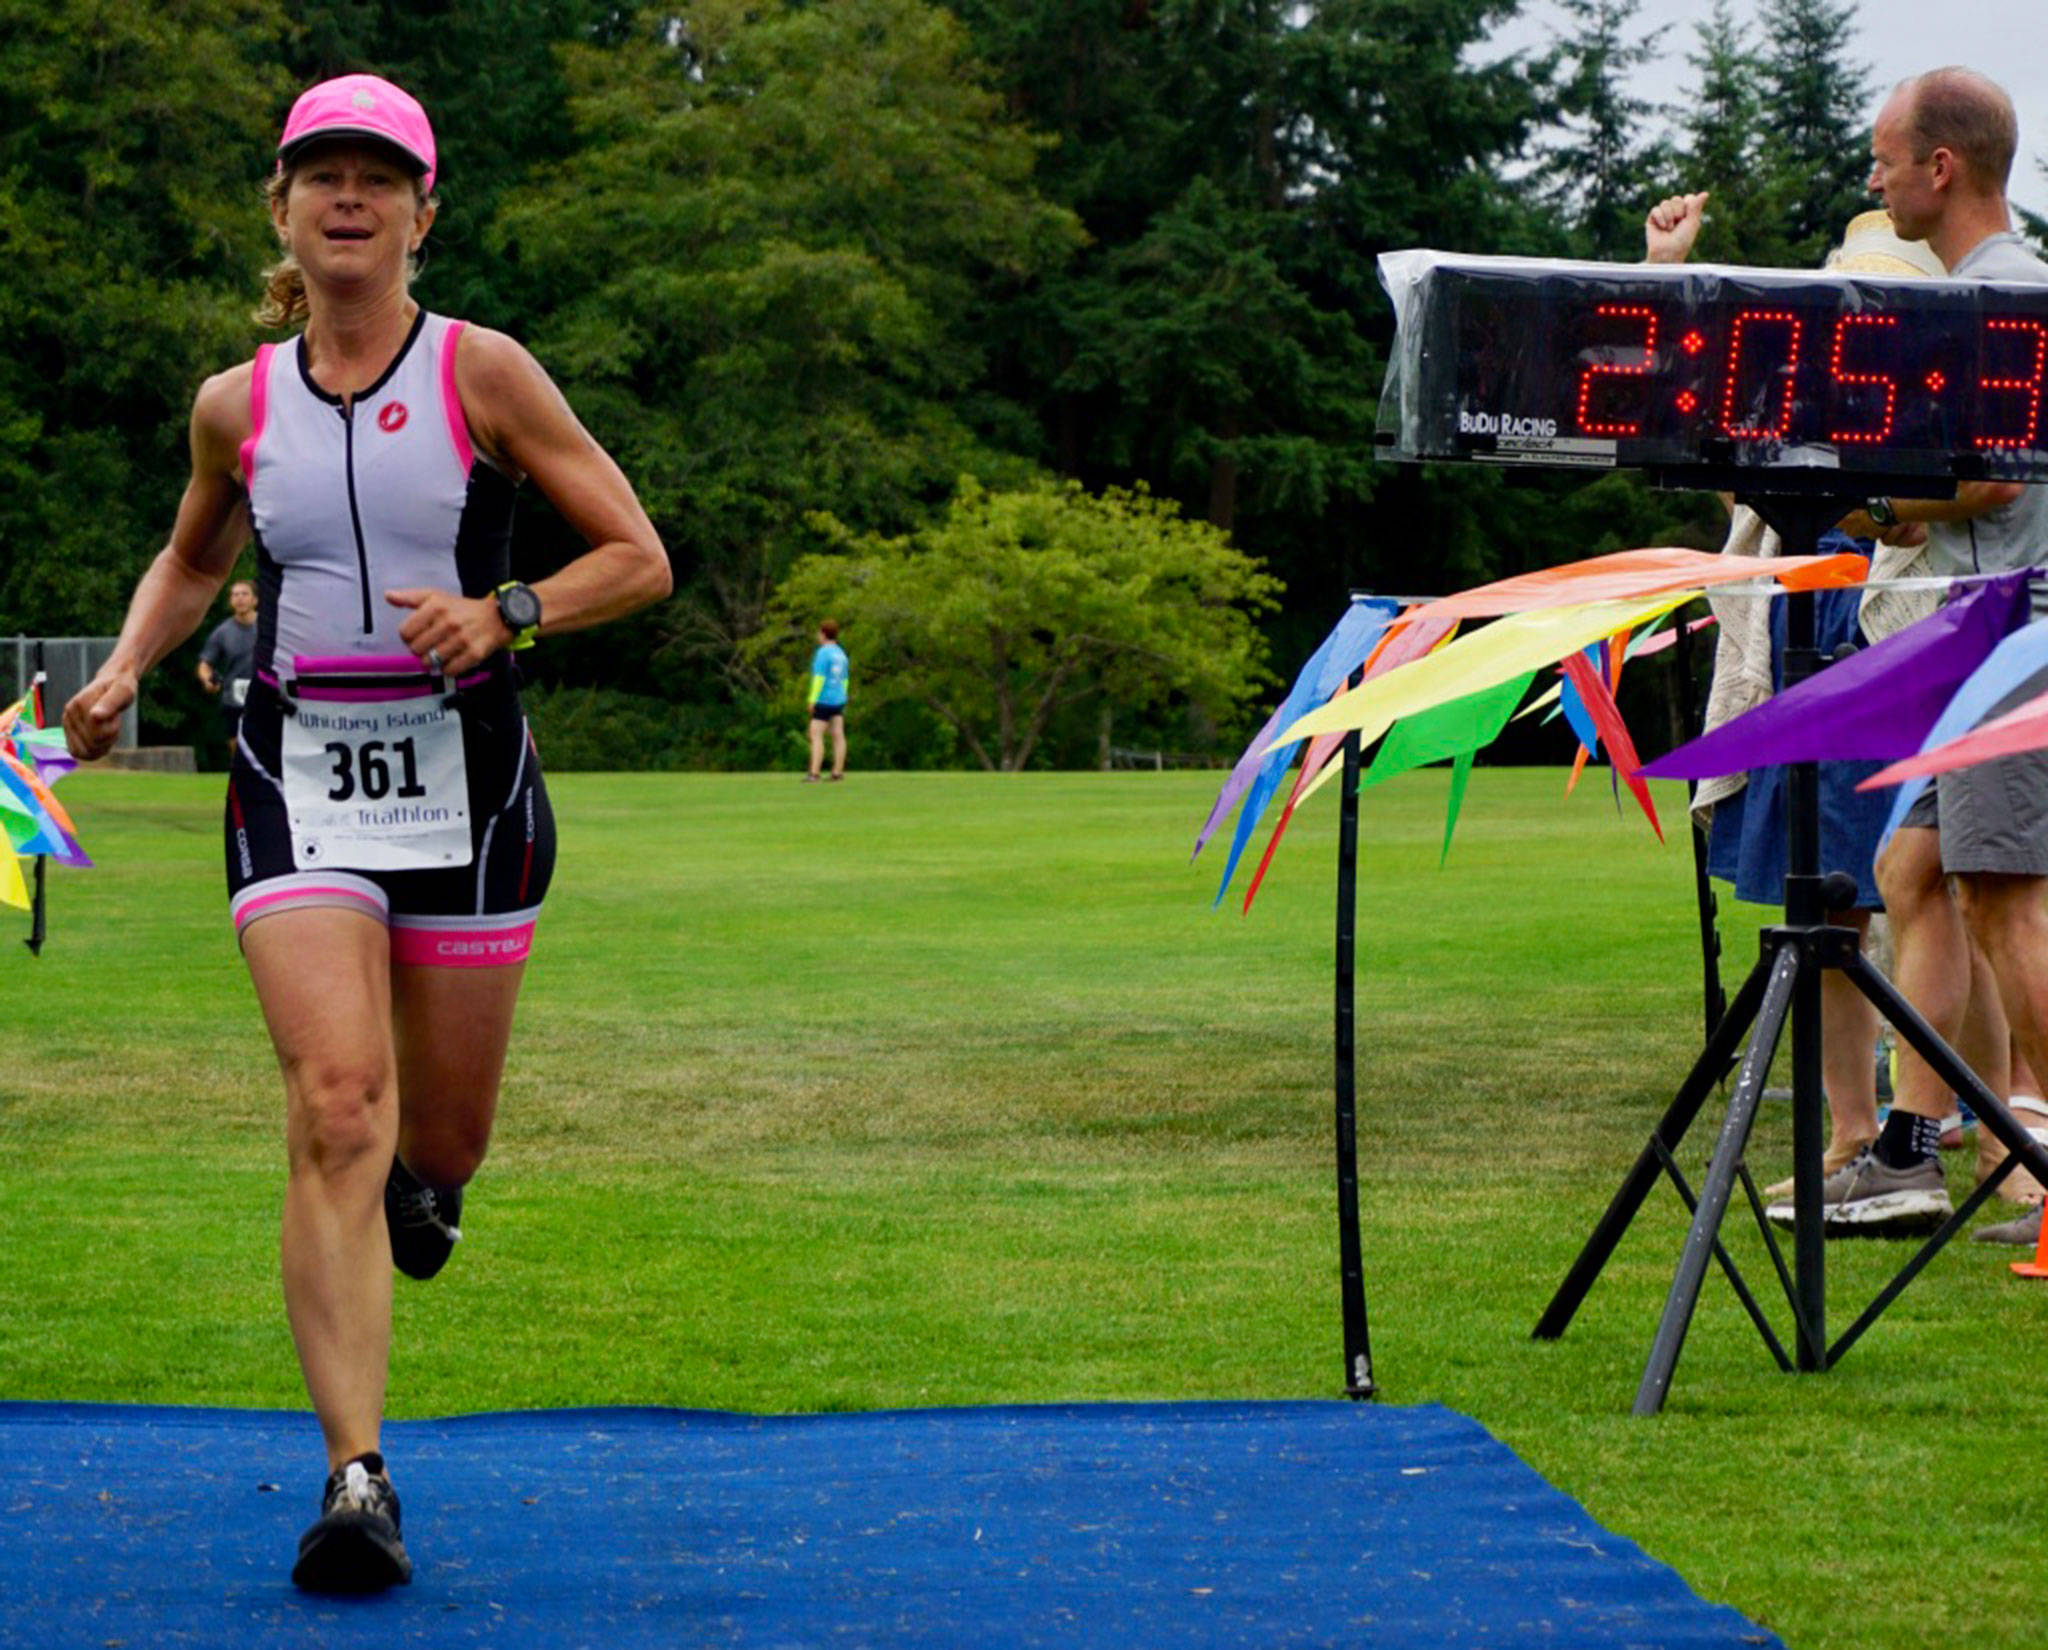 Brenda Lovie was the top local female finisher in Saturday’s Whidbey Island Triathlon. (Submitted photo)